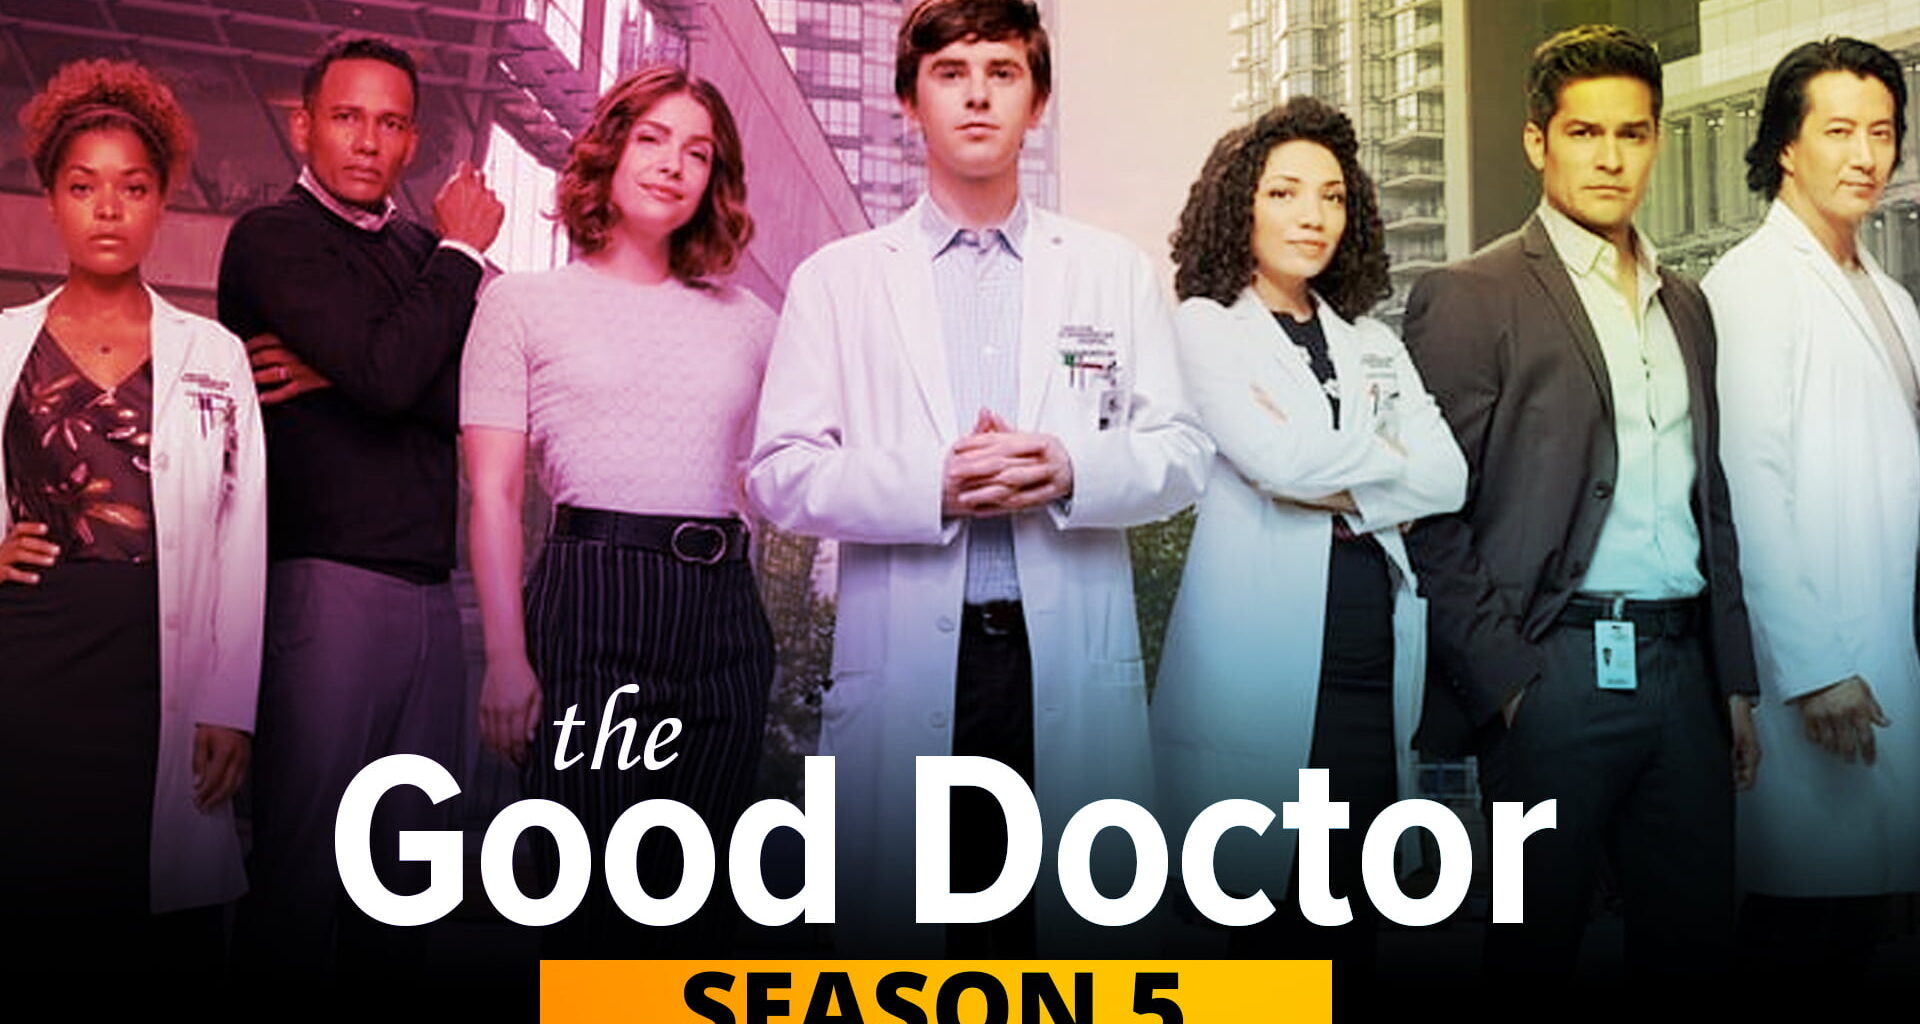 The Good Doctor Season 5 Episode 14 Release Date, Spoilers, Watch Online in USA, UK, India, and Australia